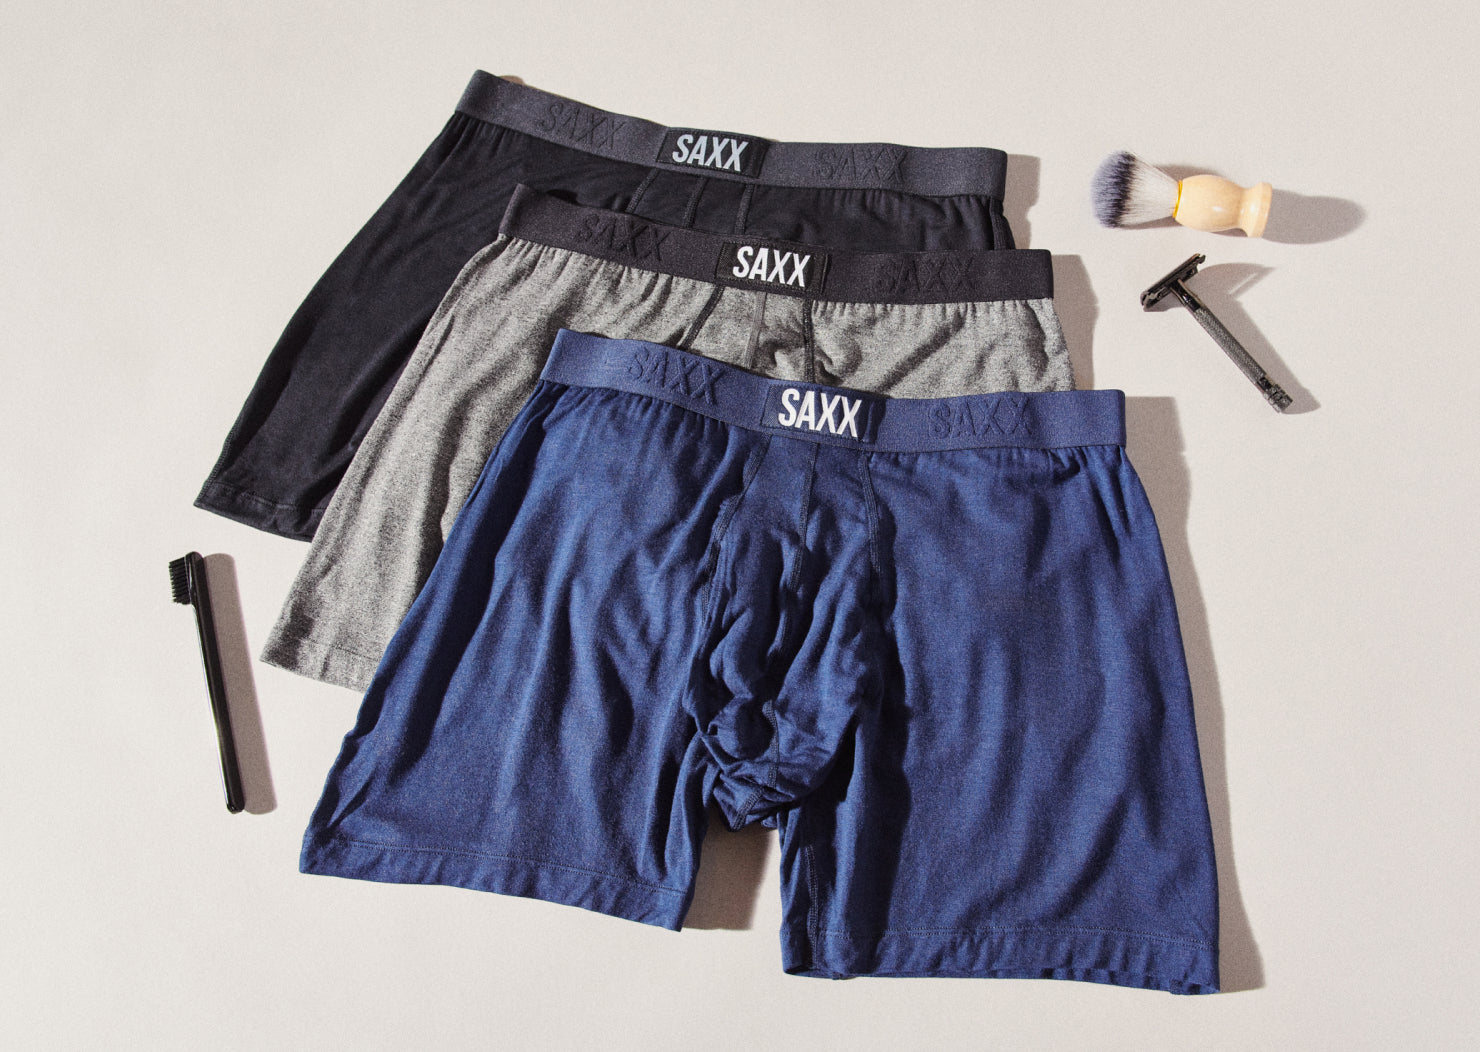 Three pairs of men’s underwear laying on a flat surface. A men’s razor and shaving brush lay on one side of the image. 